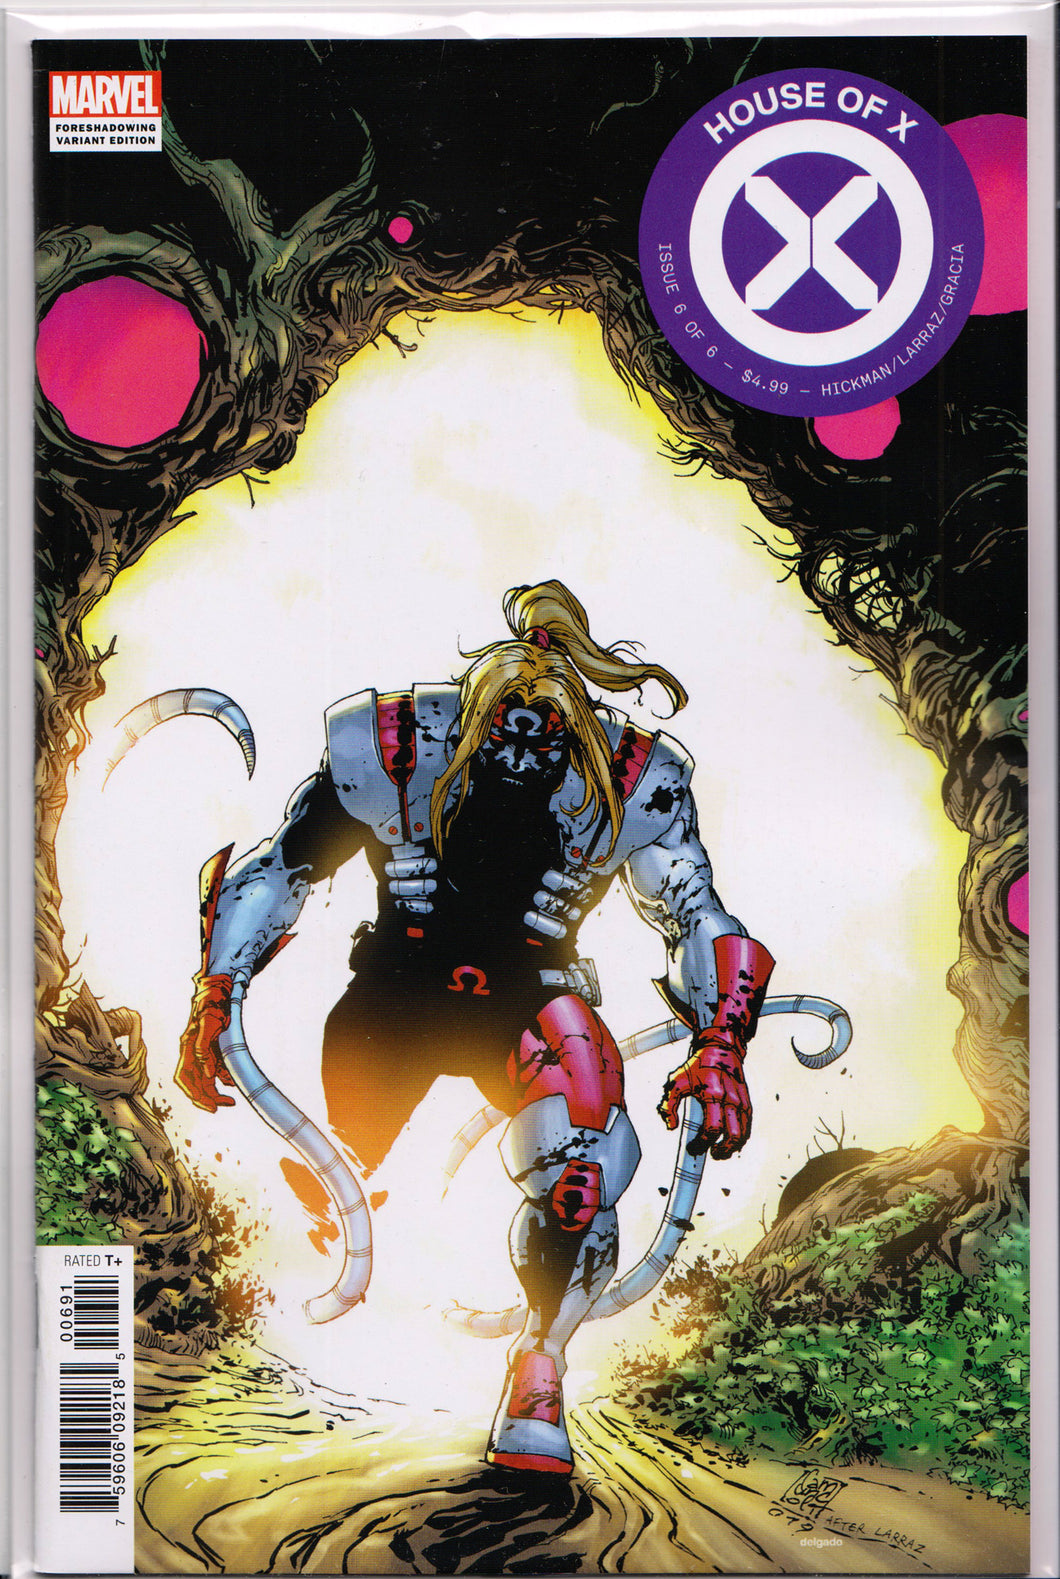 HOUSE OF X #6 (FORESHADOW VARIANT) ~ Marvel Comics